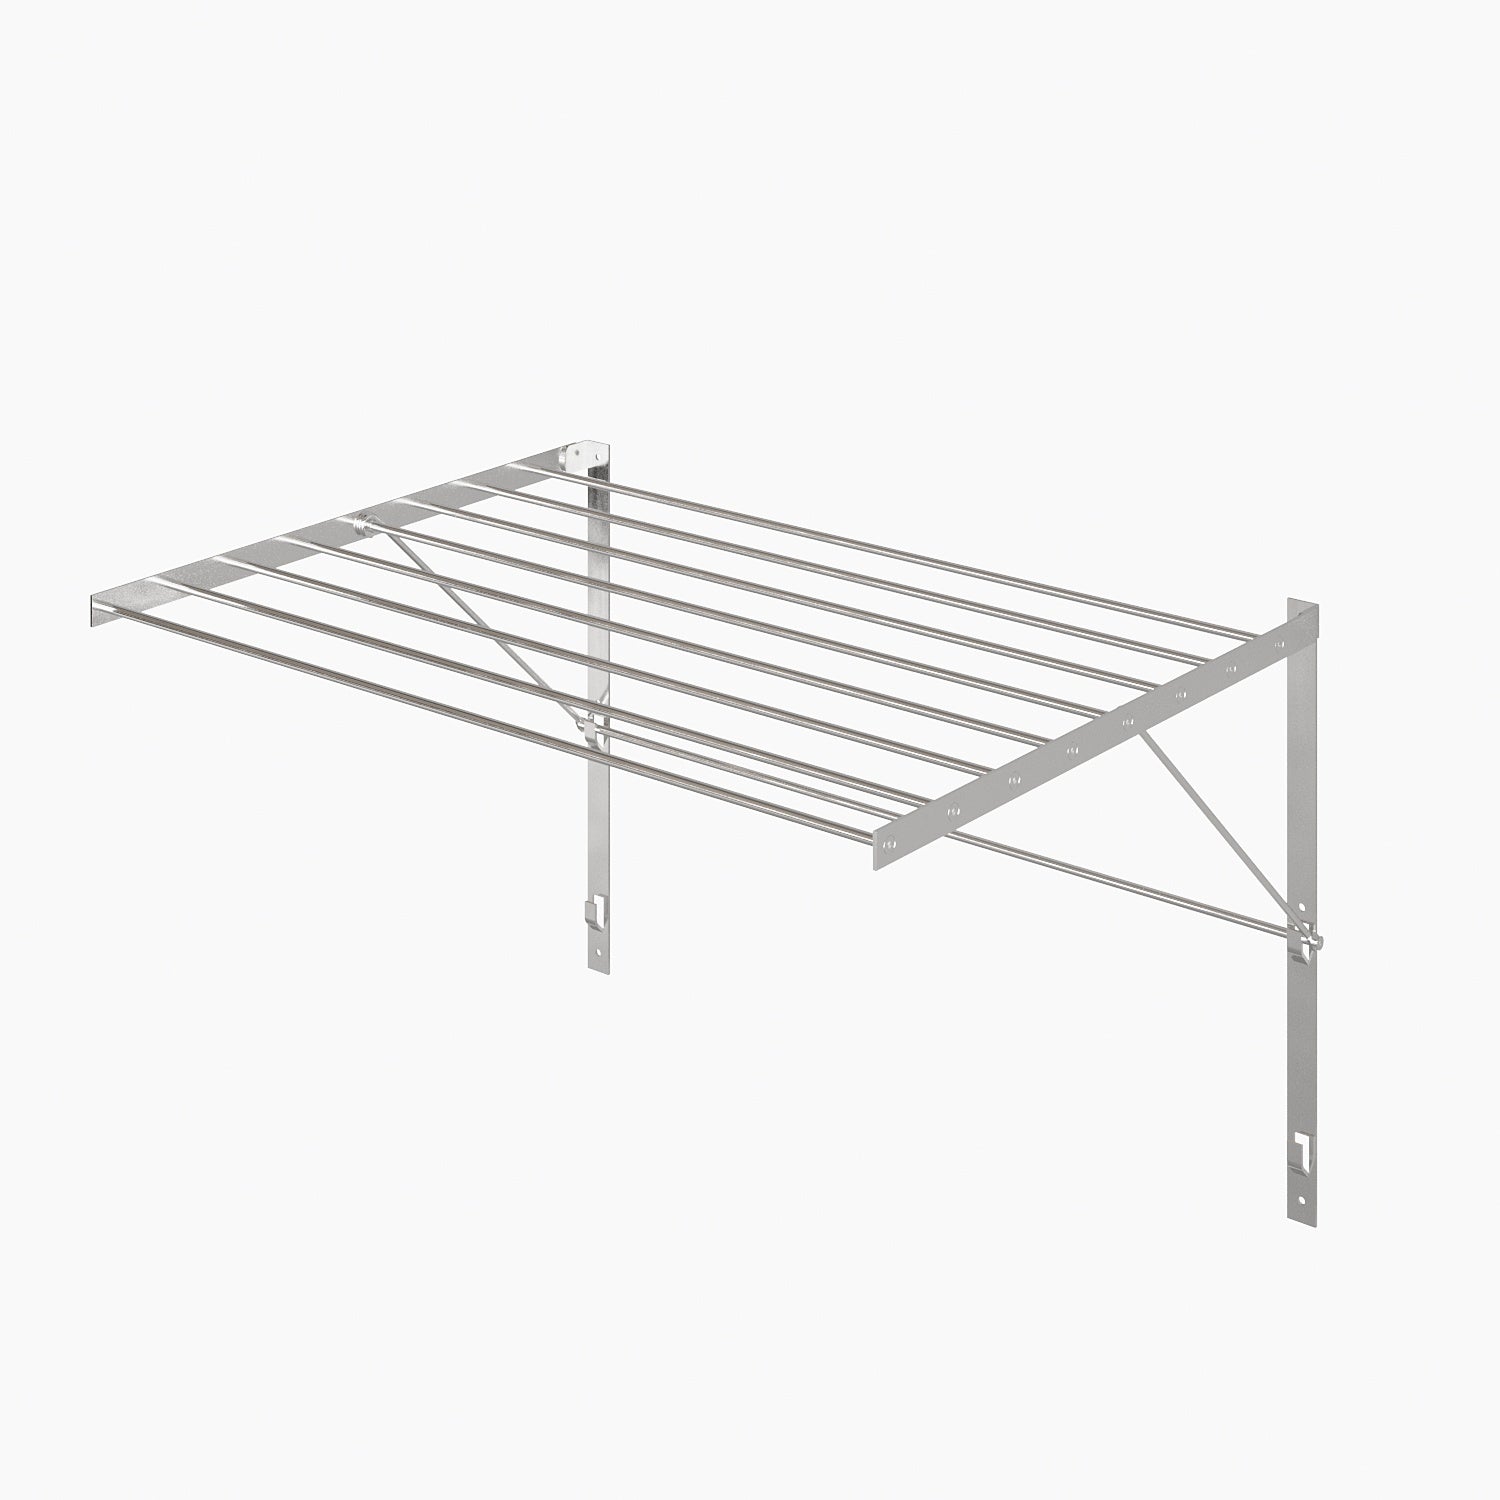 Brightmaison Clothes Drying Rack Stainless Steel Wall Mounted Folding  Adjustable Collapsible, 6.5 Yards Drying Capacity : : Home &  Kitchen